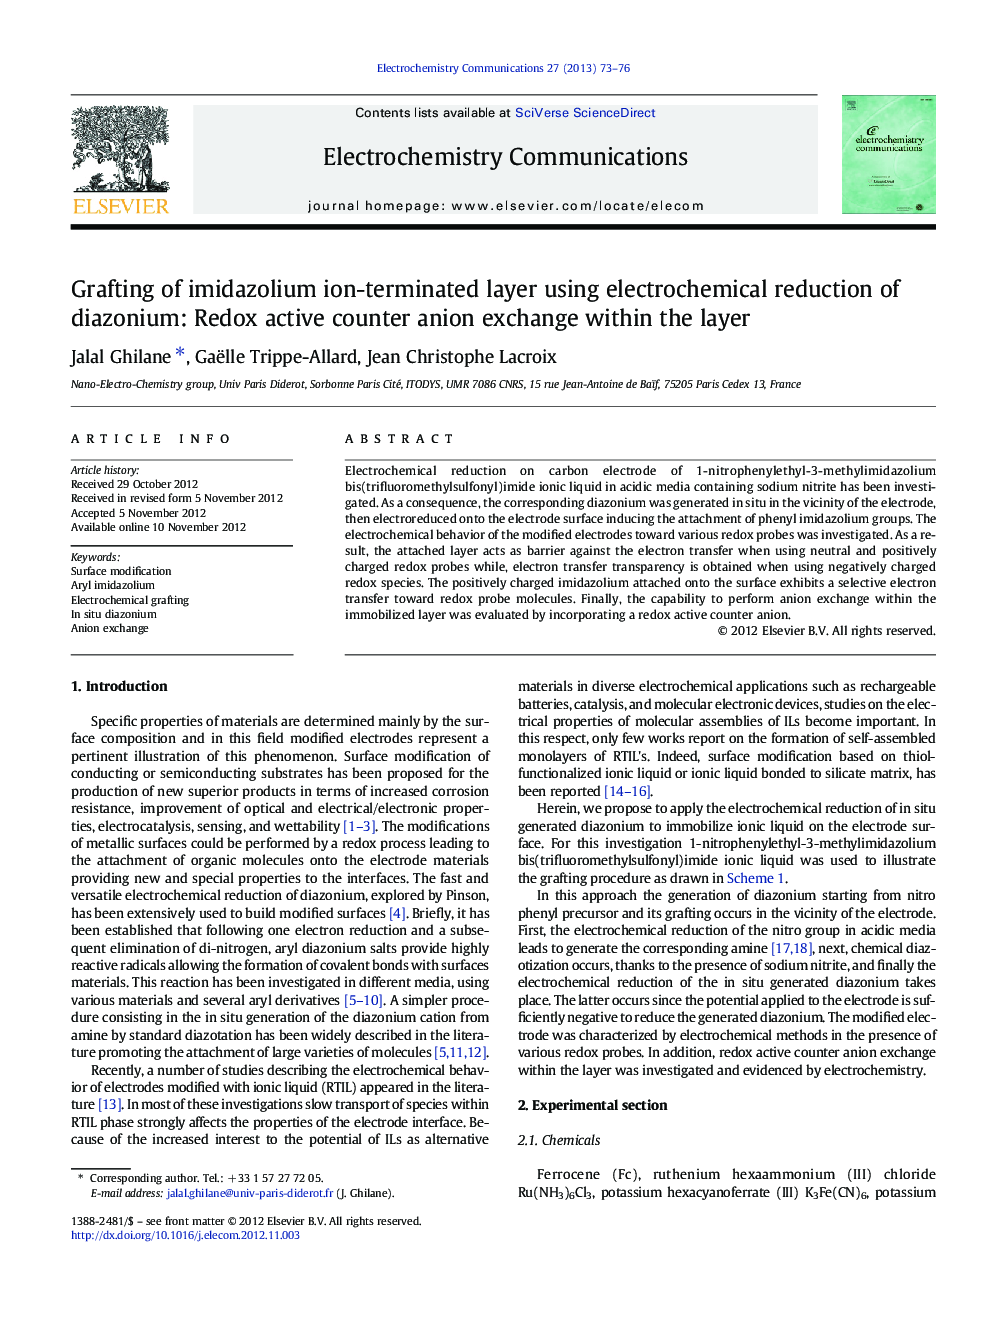 Grafting of imidazolium ion-terminated layer using electrochemical reduction of diazonium: Redox active counter anion exchange within the layer